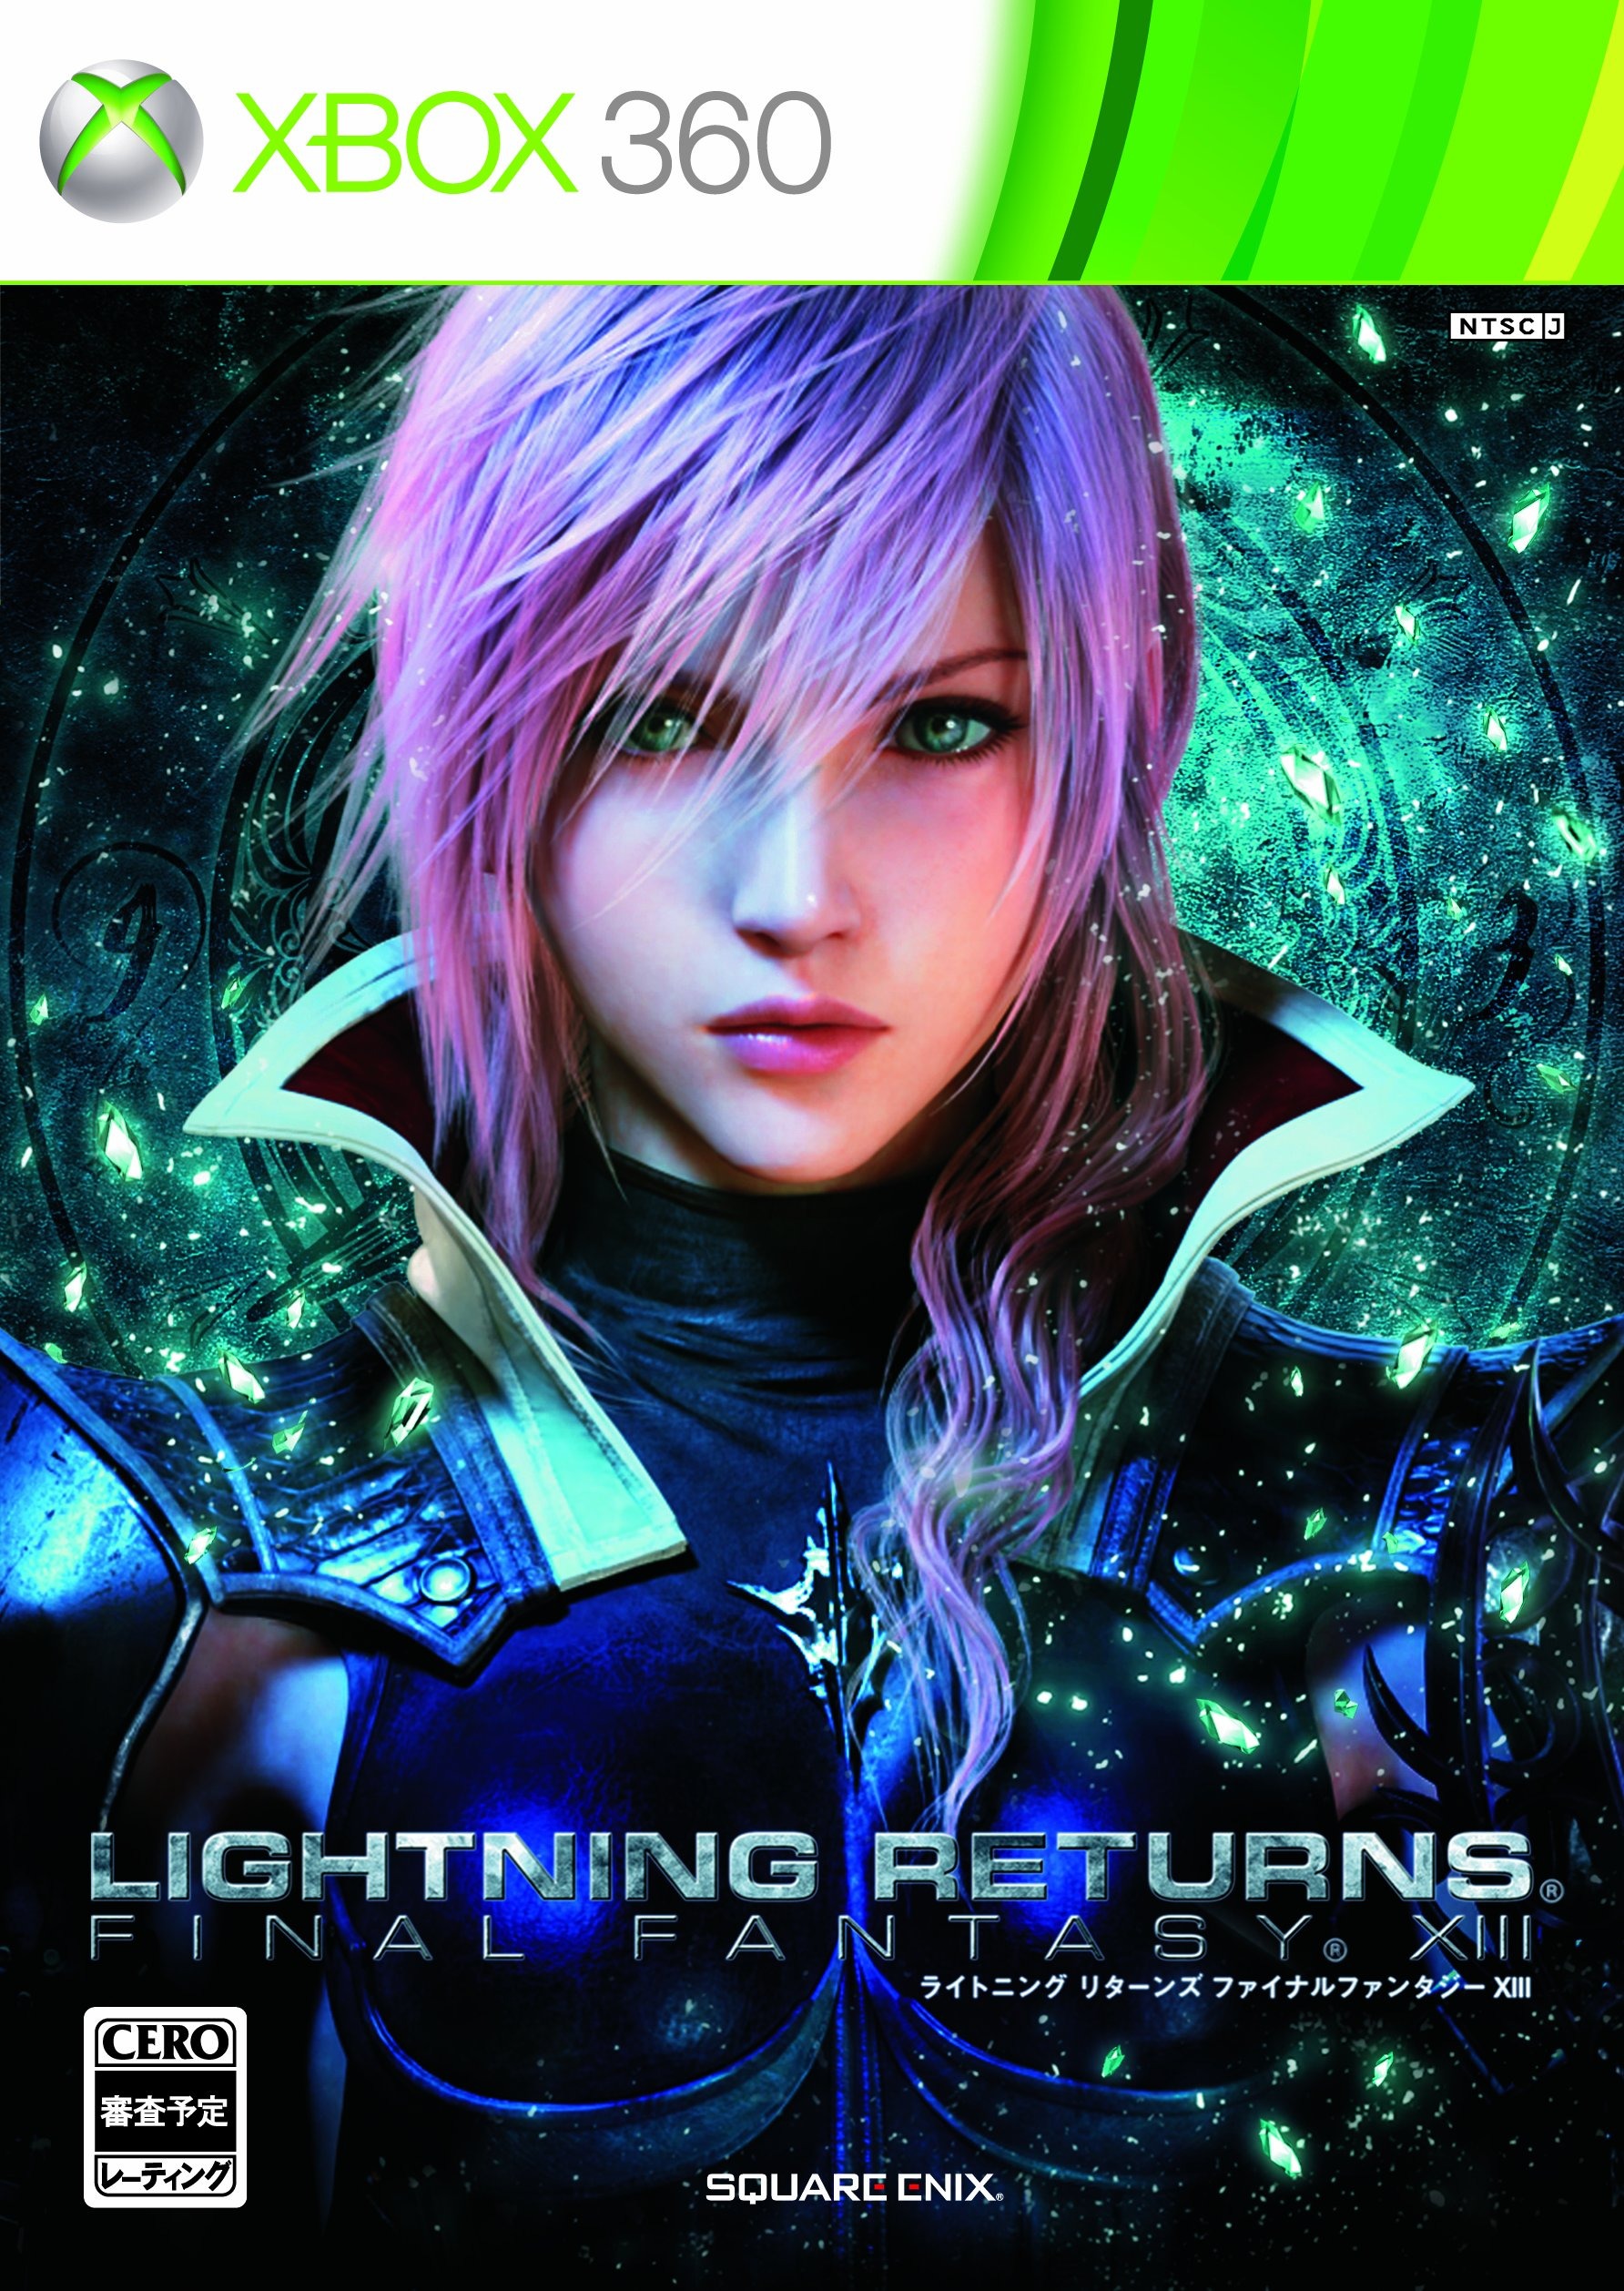 Natalina Maggio is the voice of Mogella, Moghan, and additional voices for Final Fantasy- Lightning Returns releasing in 2014